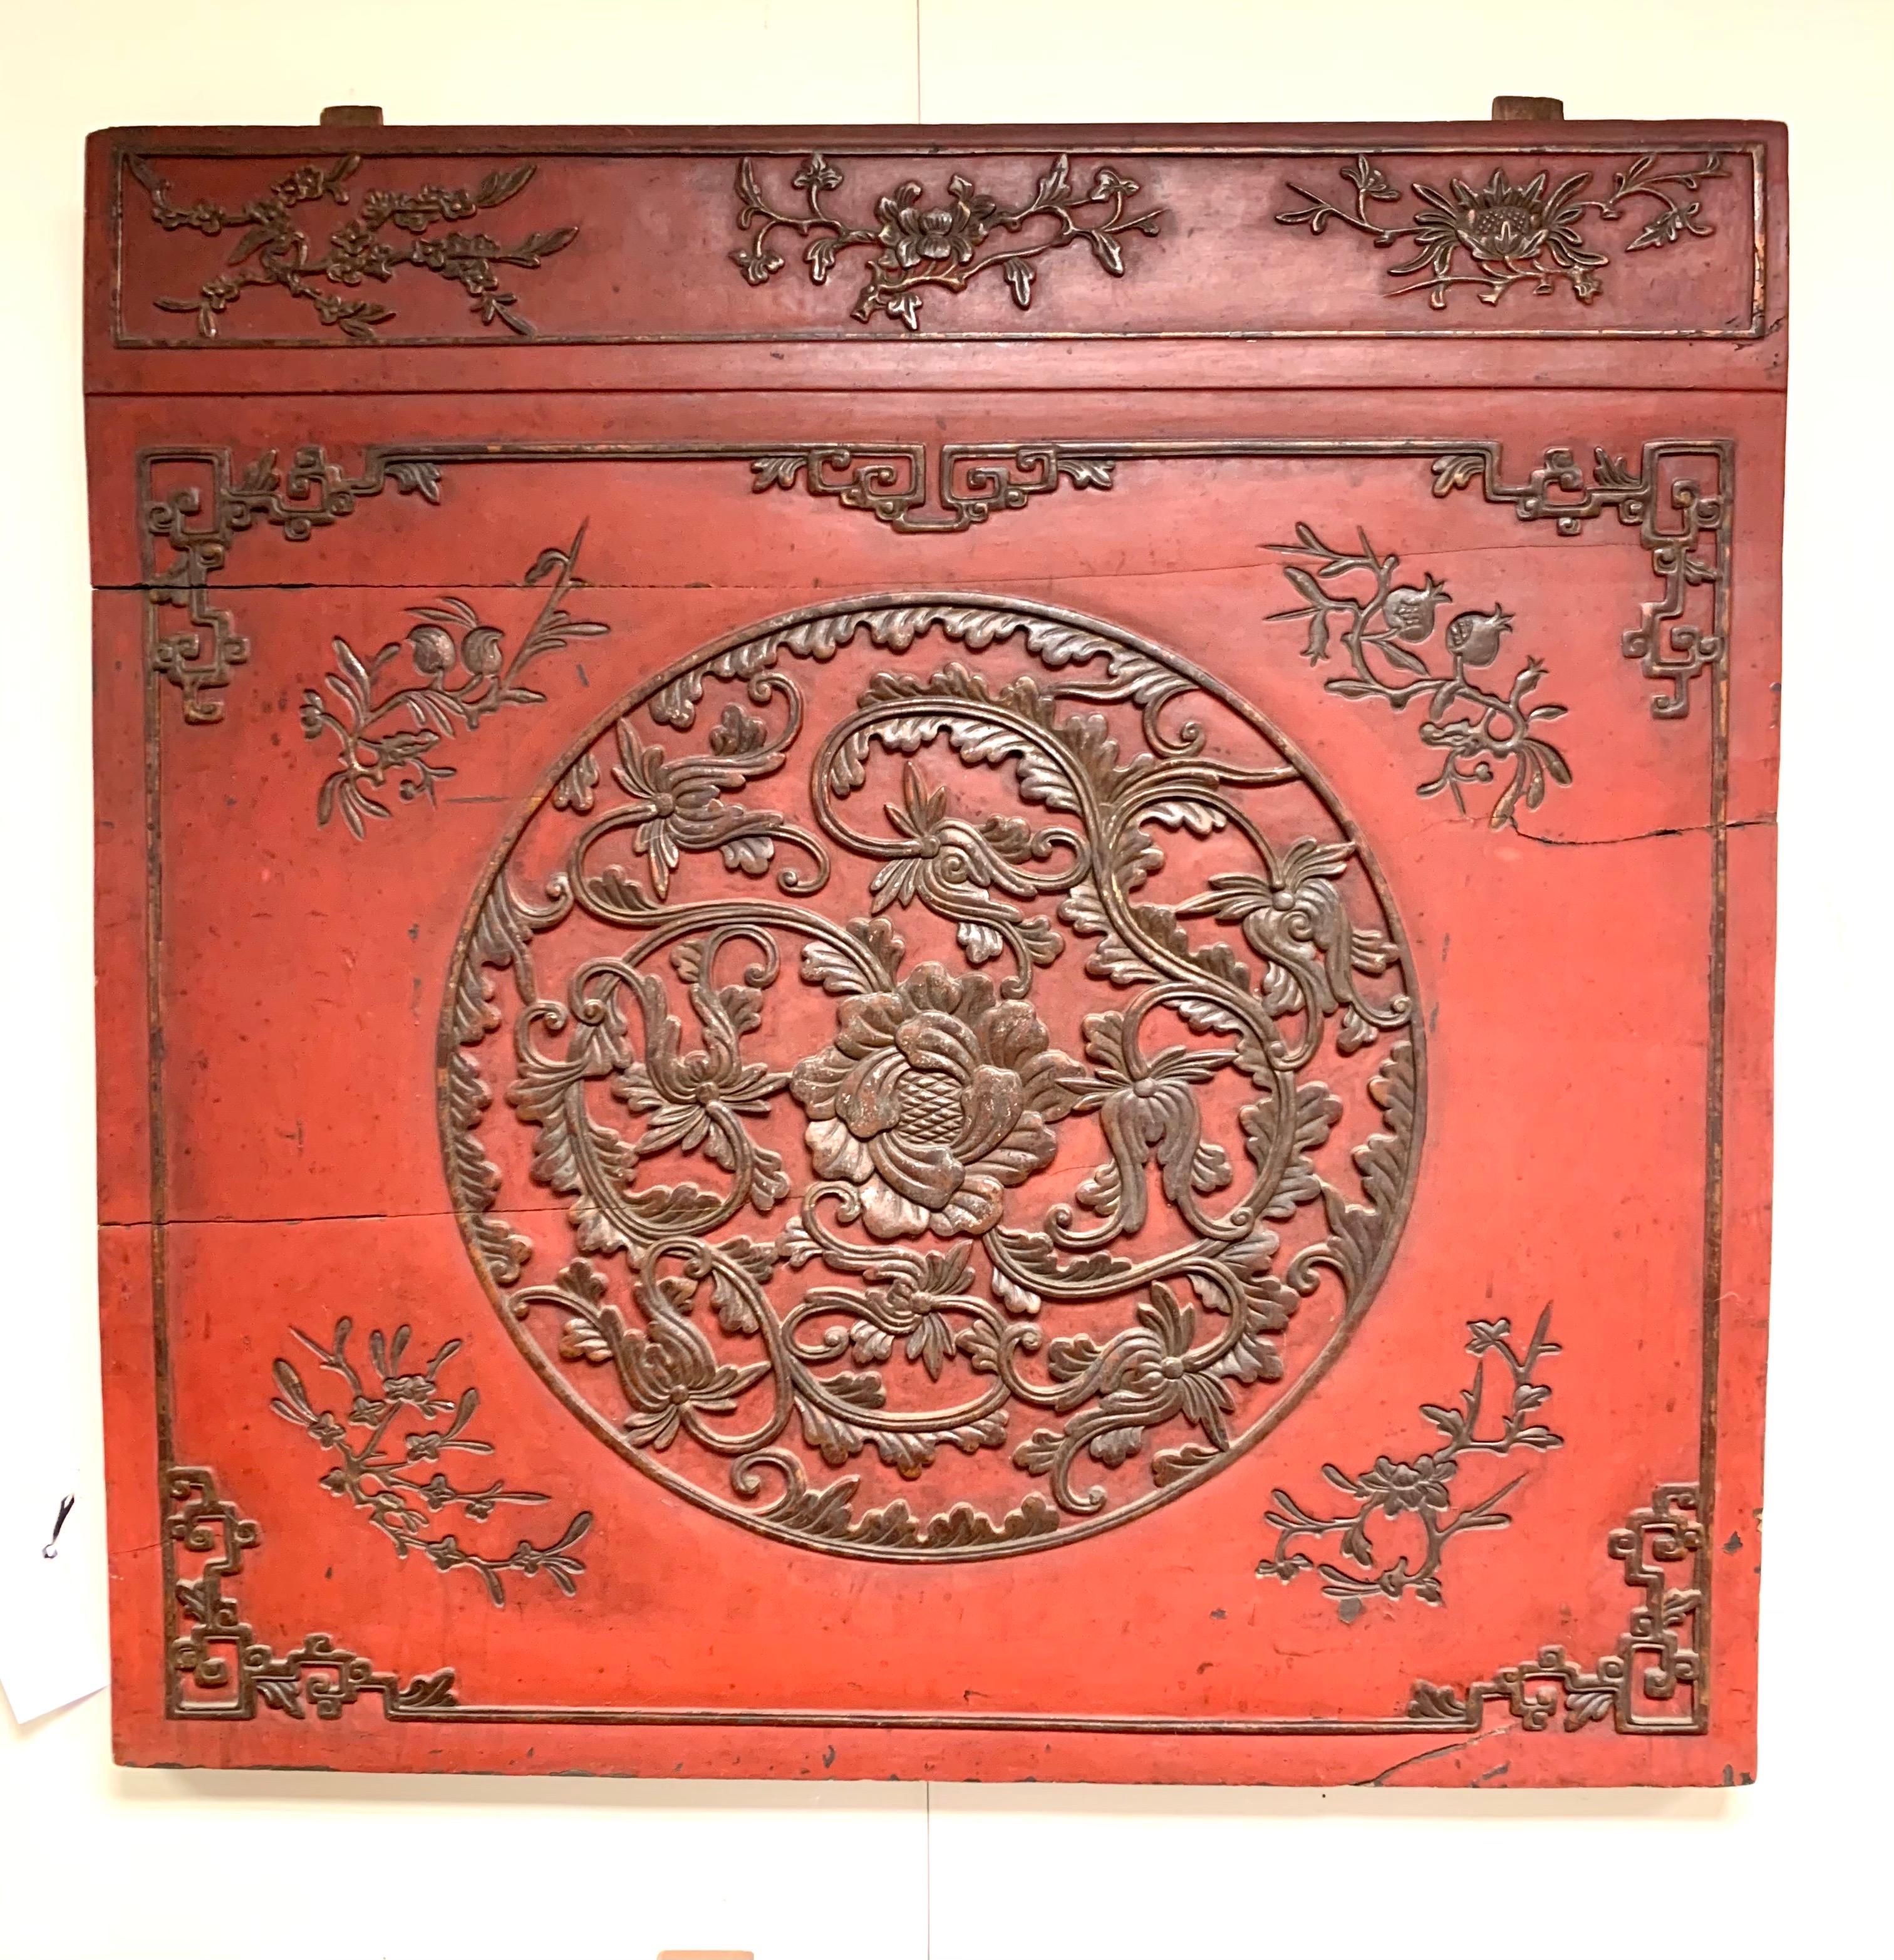 Stunning 19th century Chinese wall relief with red tones. Age appropriate wear as it is over 150 years old. Now more than ever, home is where the heart is.